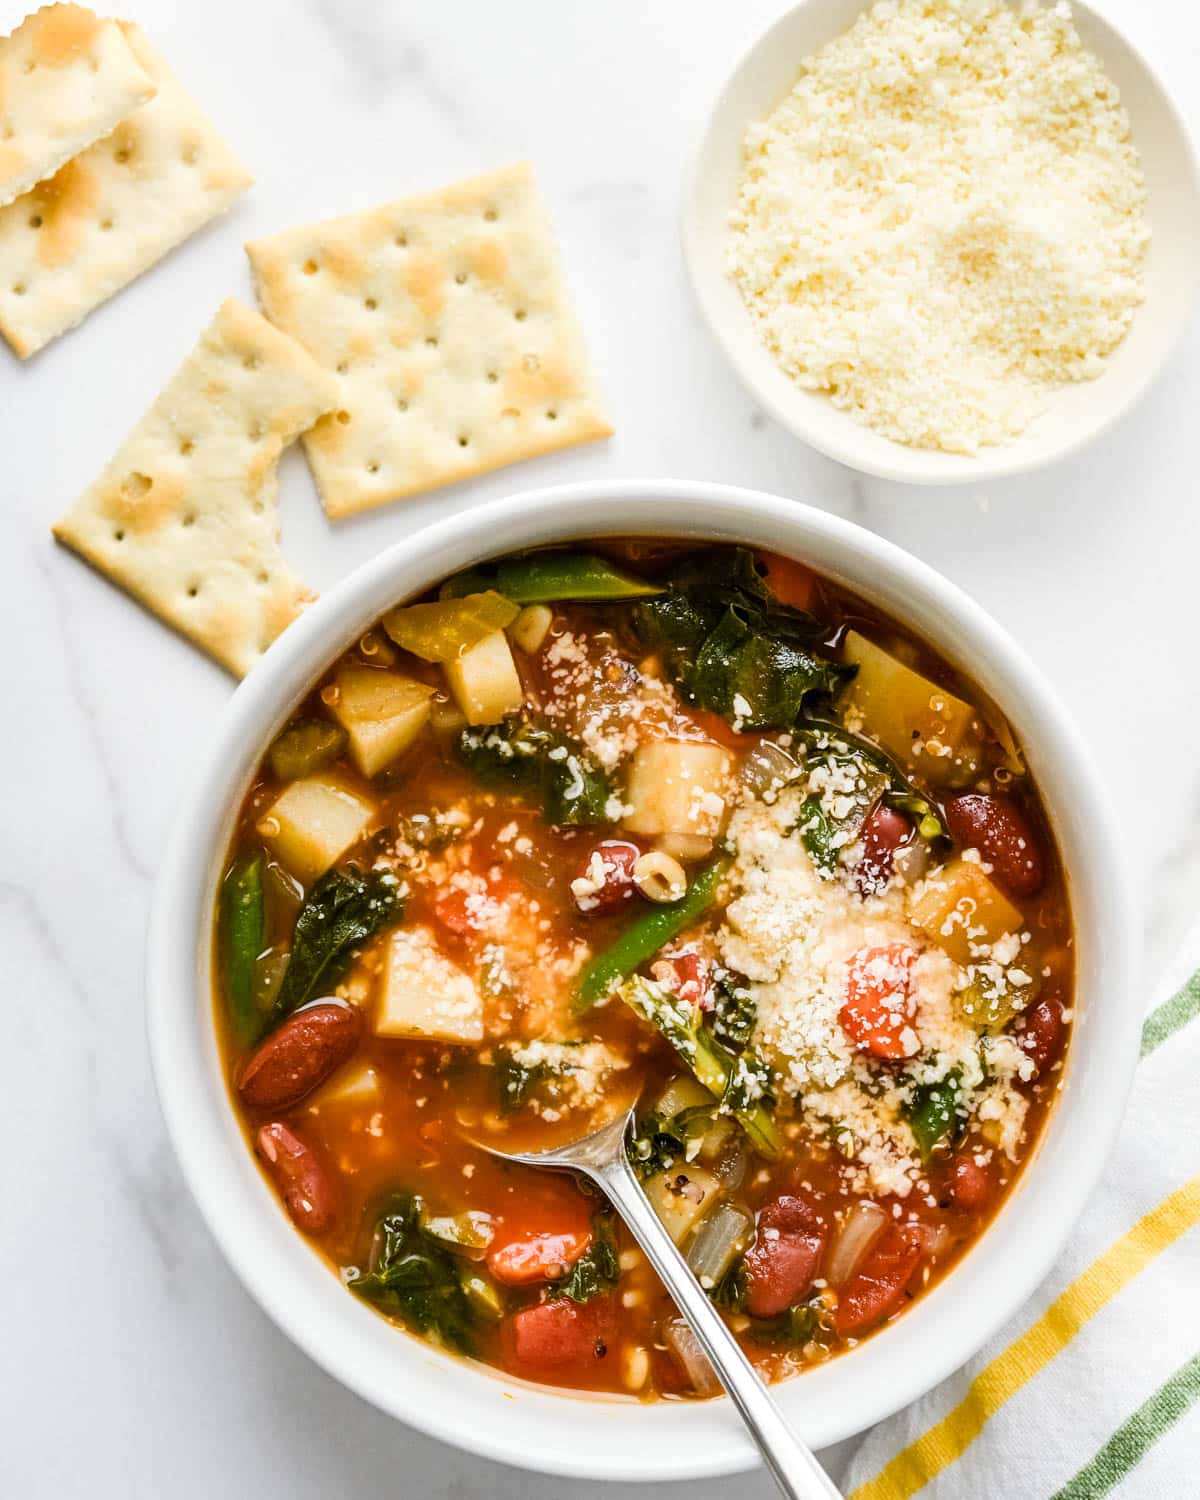 Serving vegetarian minestrone soup with crackers and parmesan.